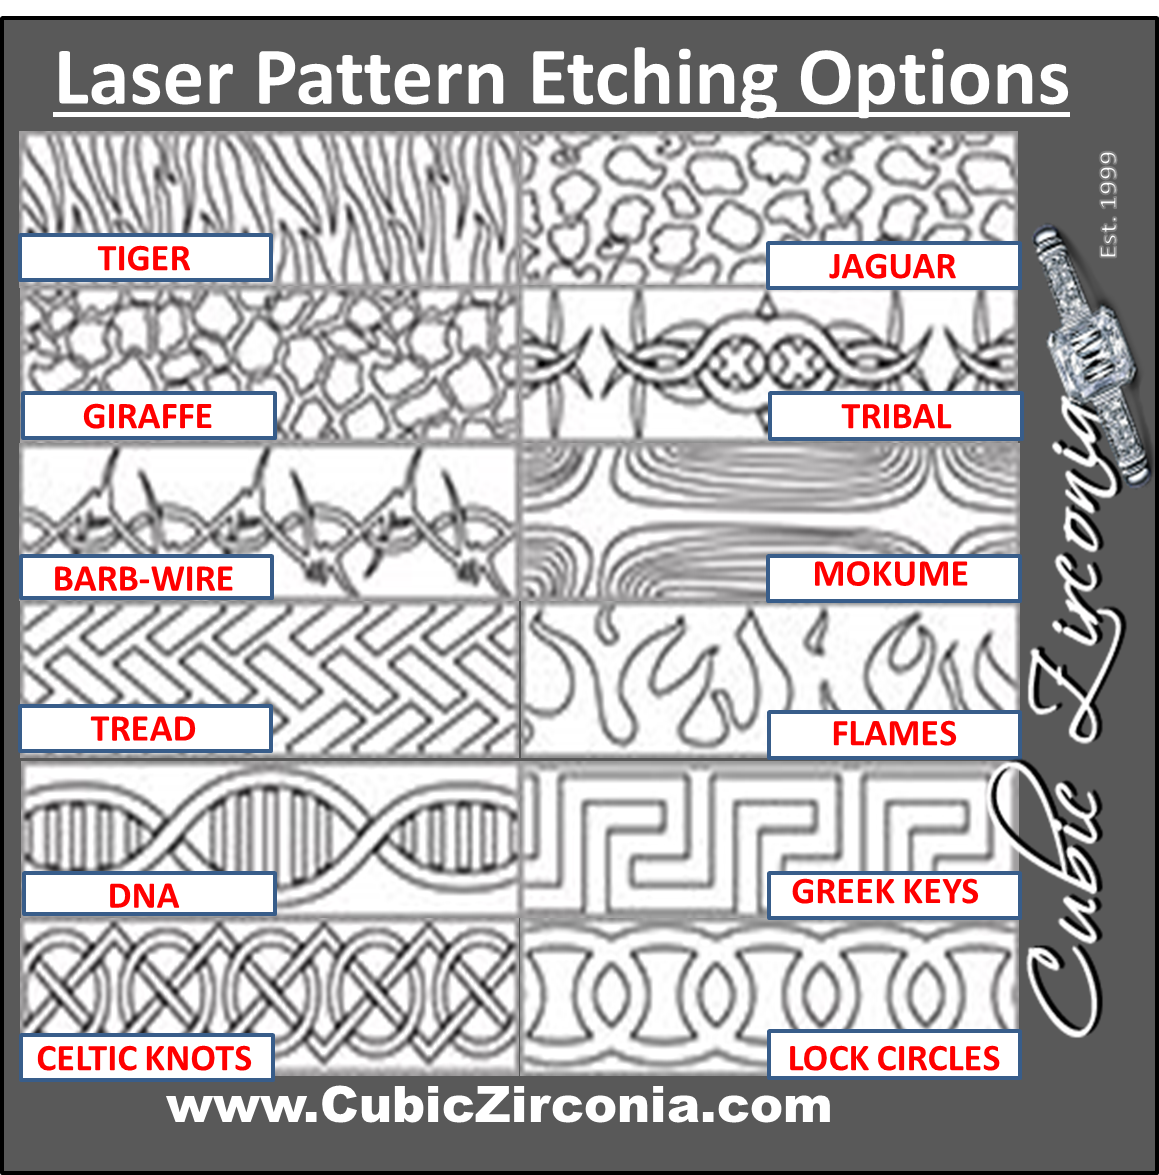 Laser Pattern Etching For Wedding Bands and Rings